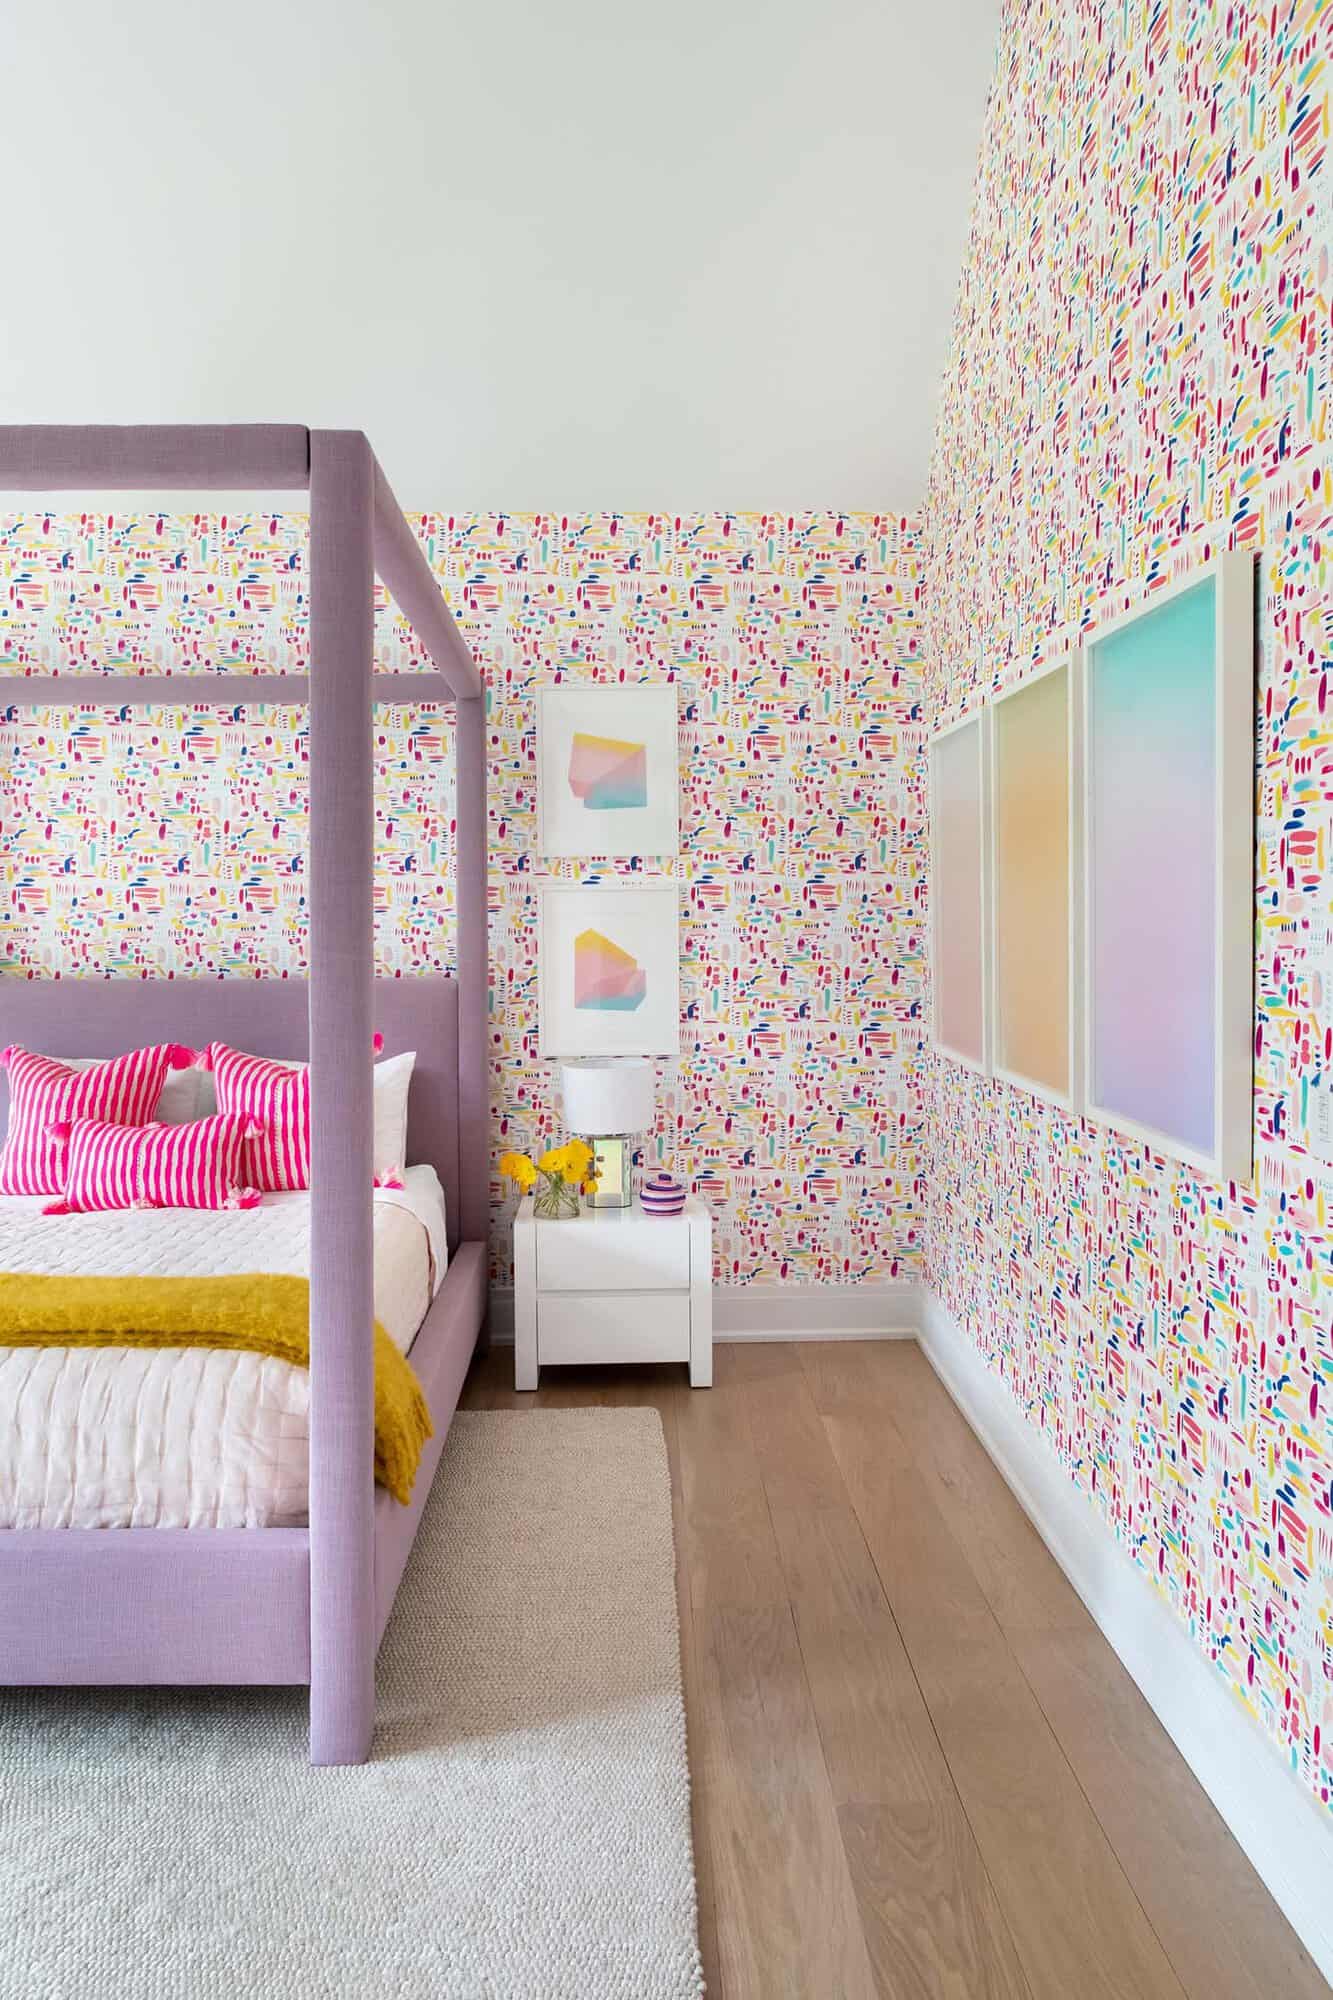 transitional style girls bedroom with patterned wallpaper